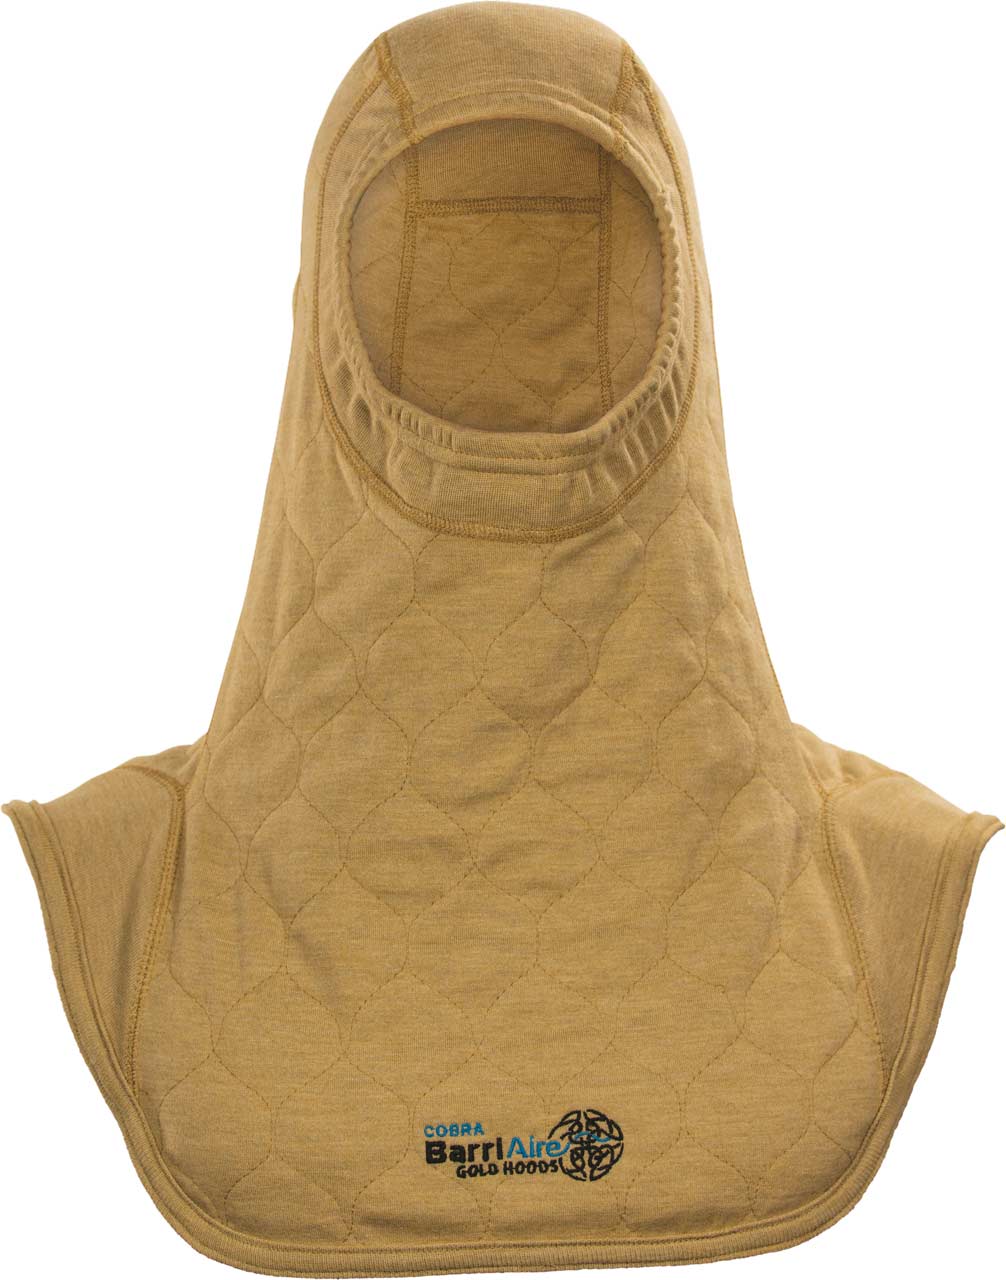 PGI BarriAire Gold Particulate Hood - Complete Coverage with Standard Bib and Rib Knit Face Opening 39700-00-194071 - Front